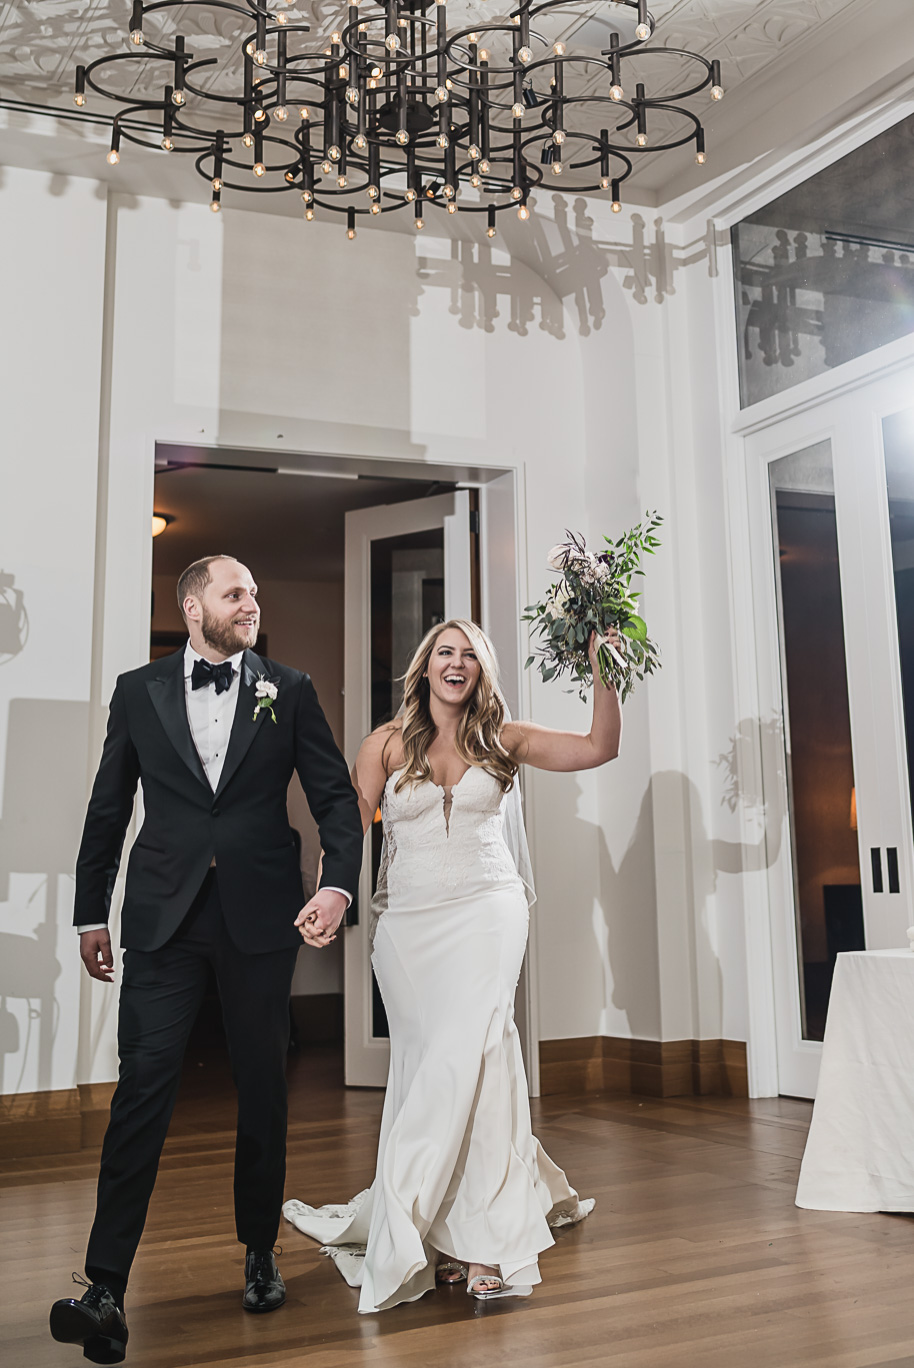 Winter Shinola Hotel Wedding in Downtown Detroit, Michigan provided by Kari Dawson, top-rated Detroit wedding photographer, and her team.